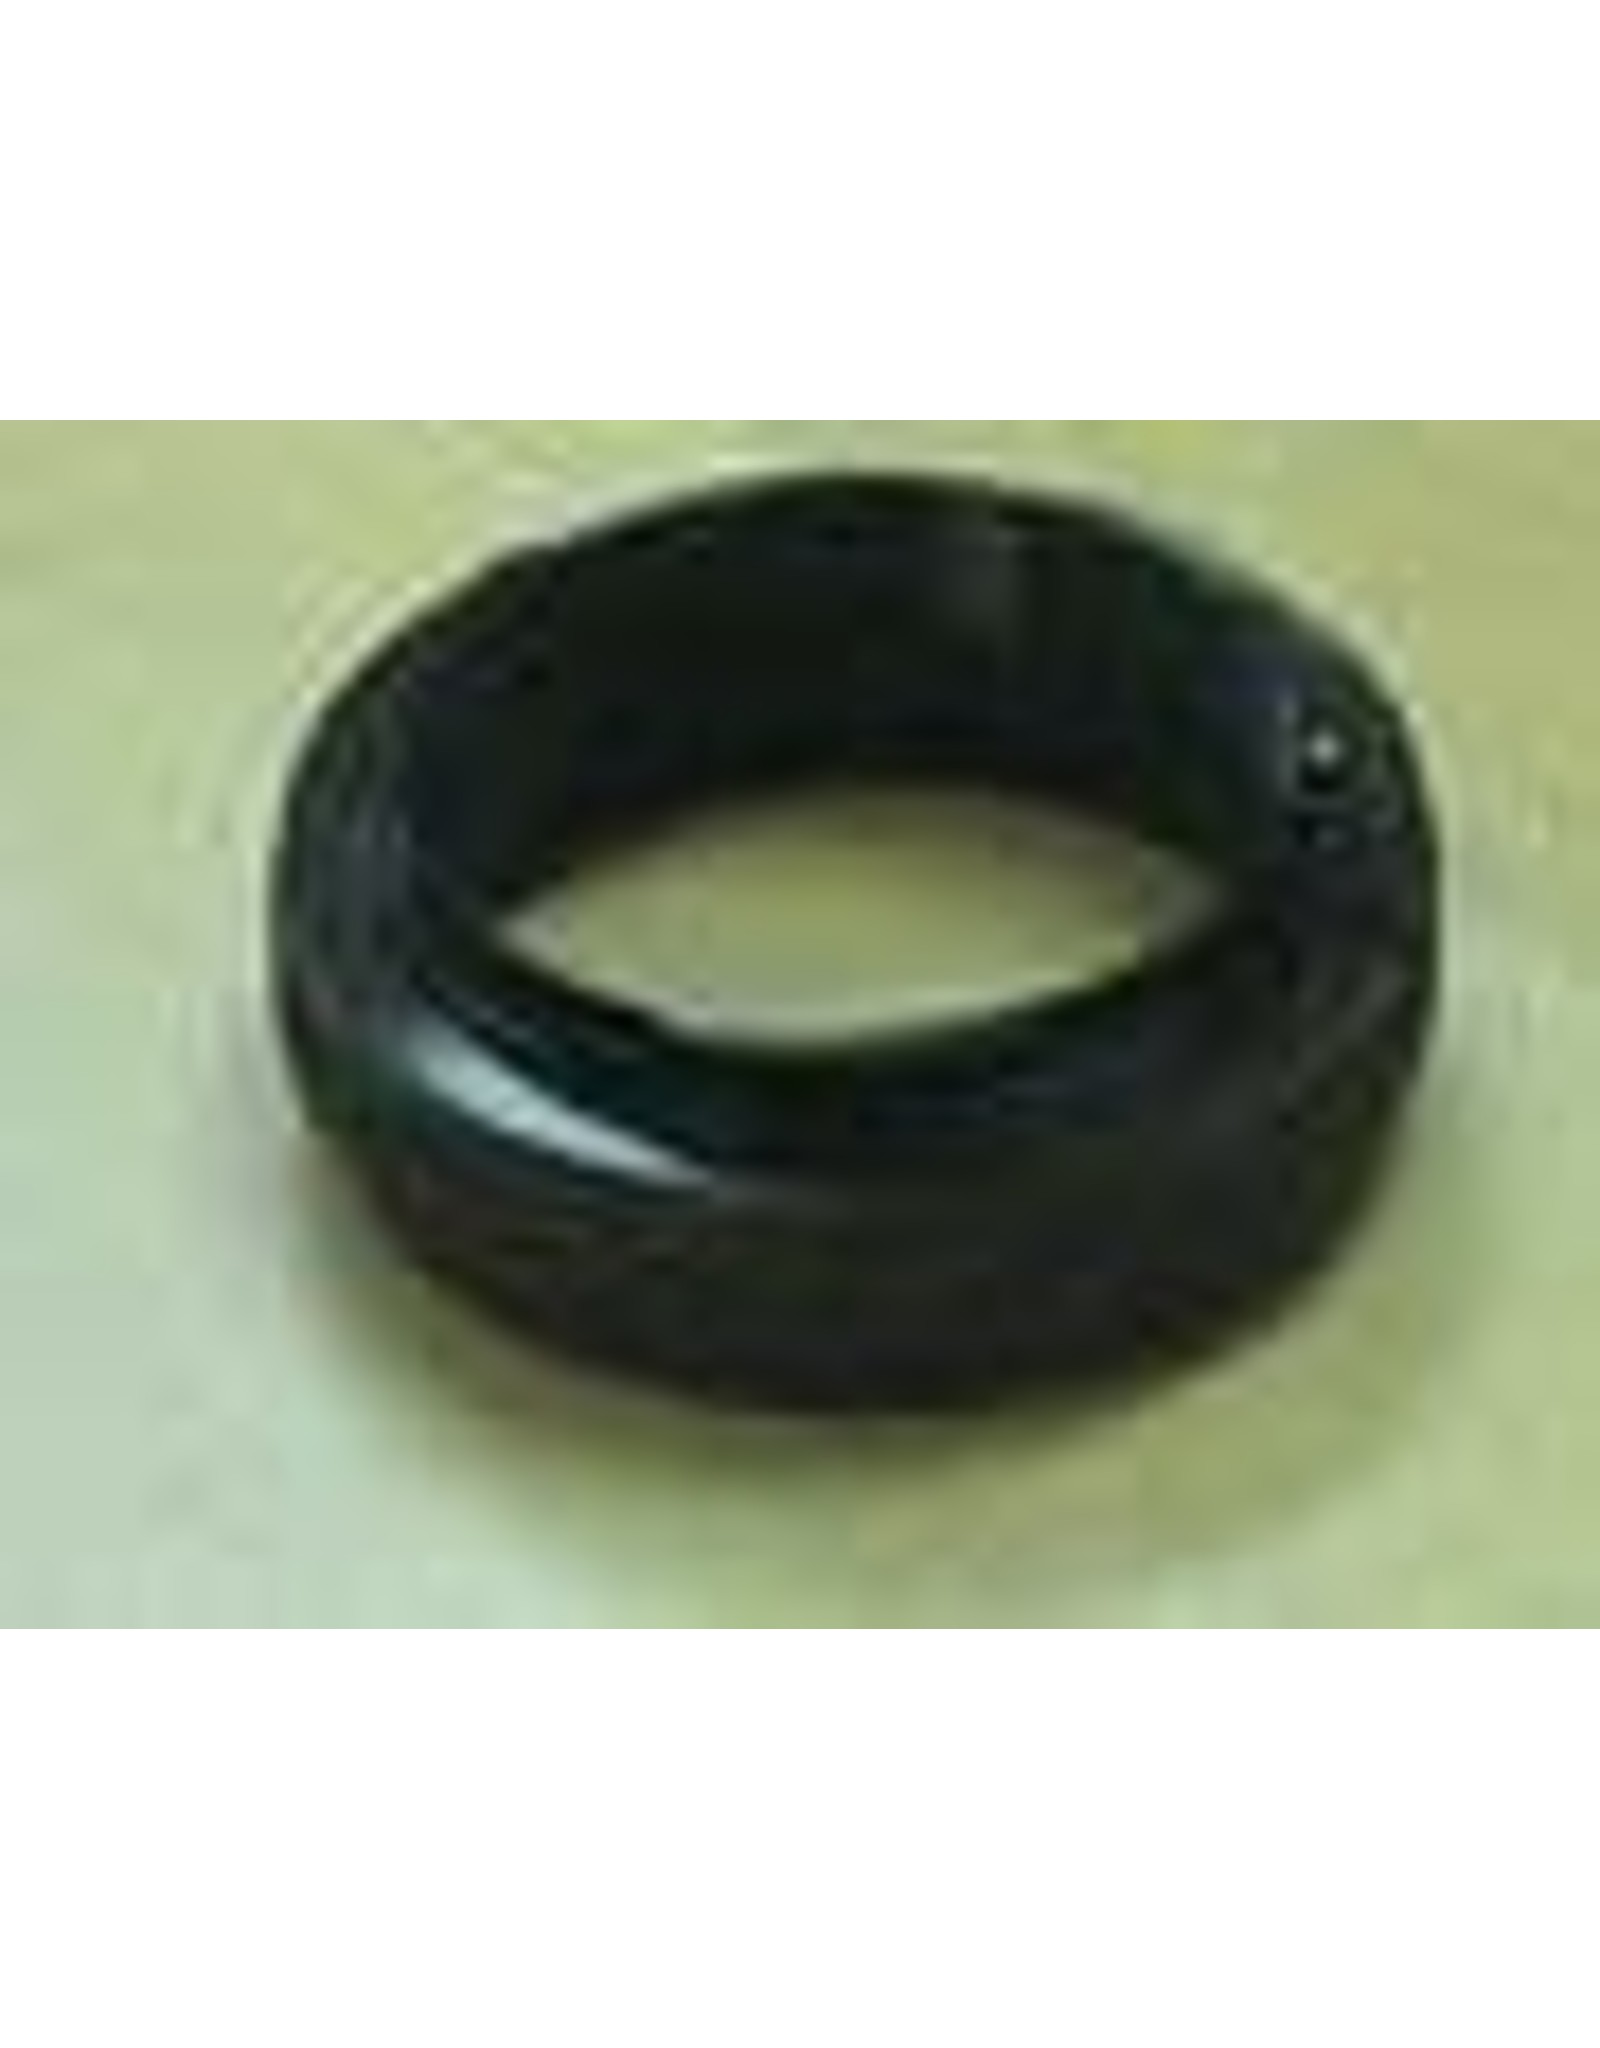 Takahashi Takahashi wide mount ring to FS-60C for Canon EOS cameras